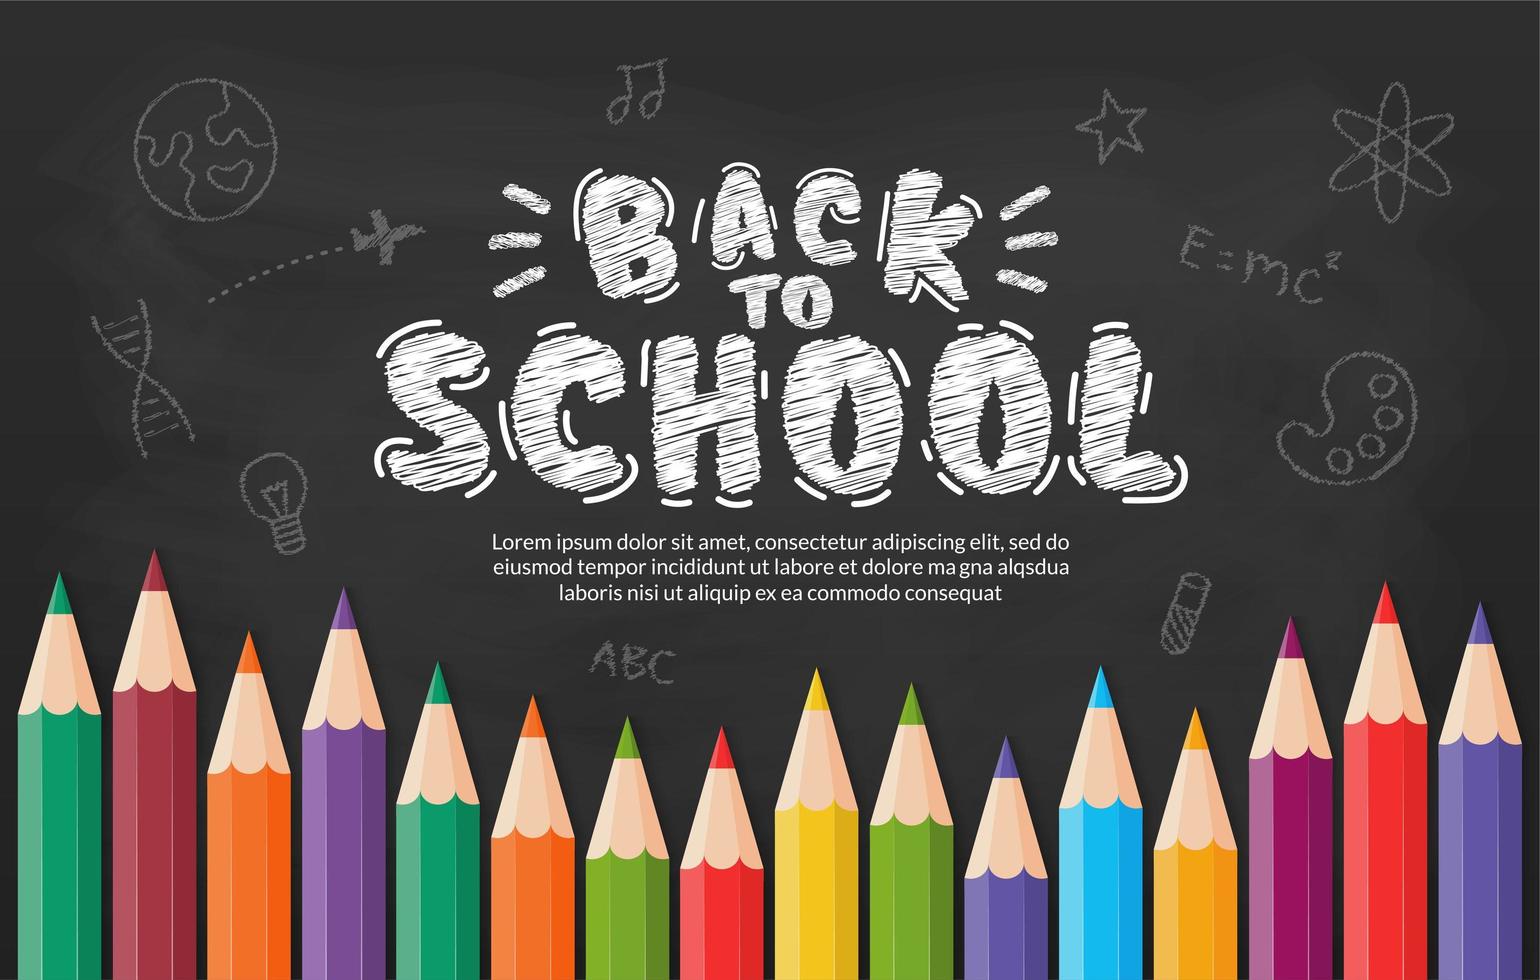 Back To School Vector Art, Icons, and Graphics for Free Download